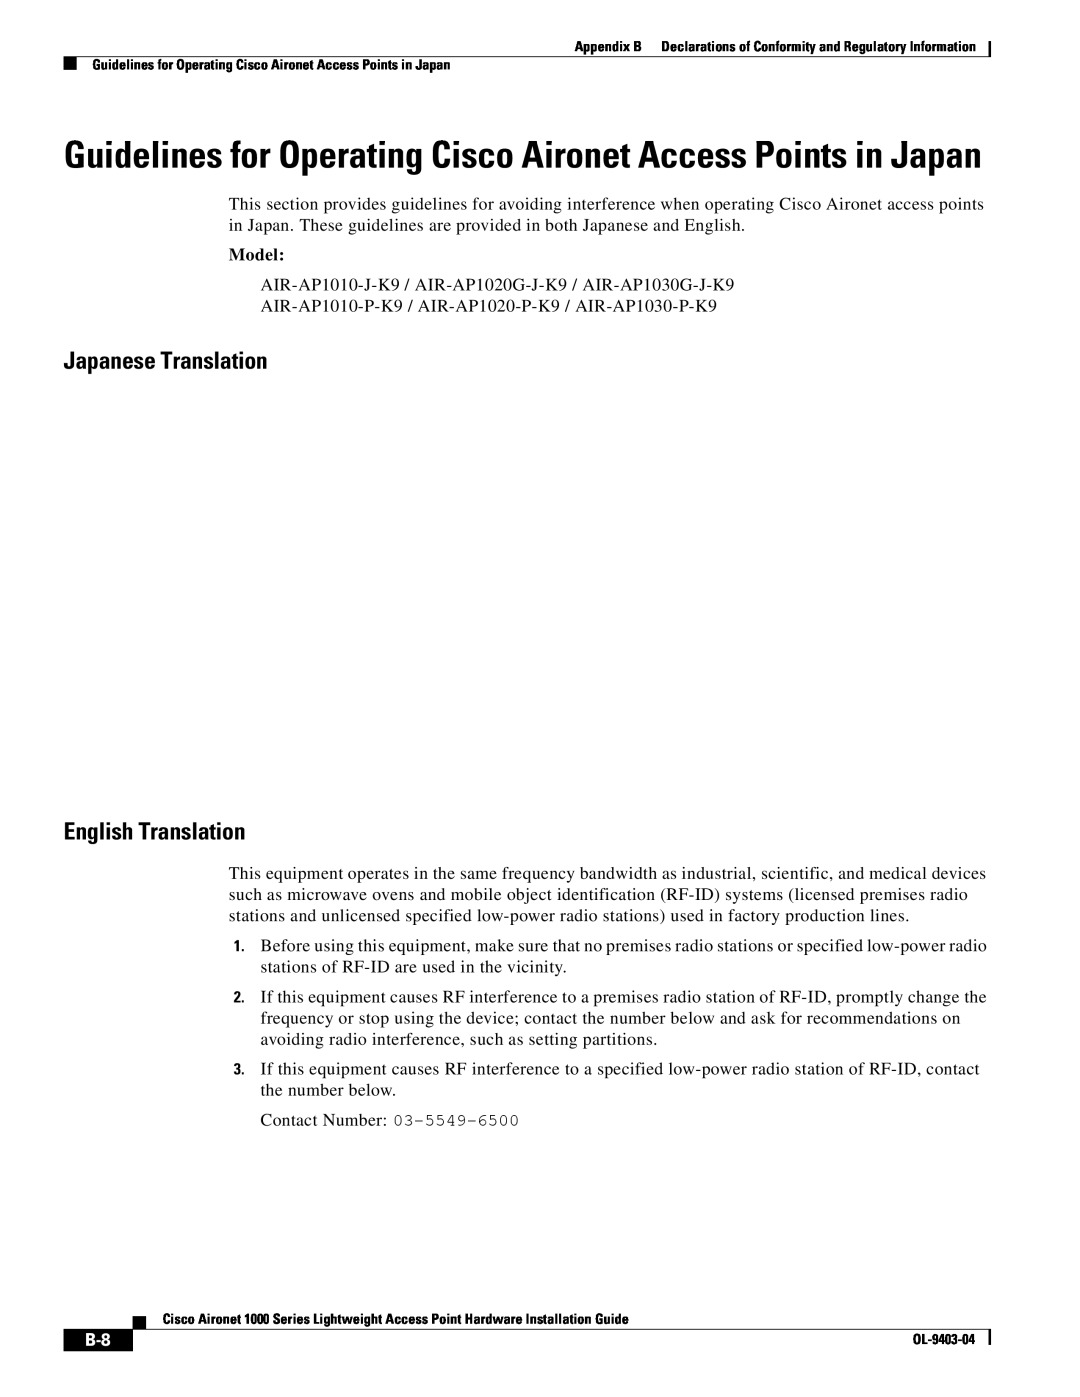 Cisco Systems 2000 Japanese Translation English Translation, Guidelines for Operating Cisco Aironet Access Points in Japan 